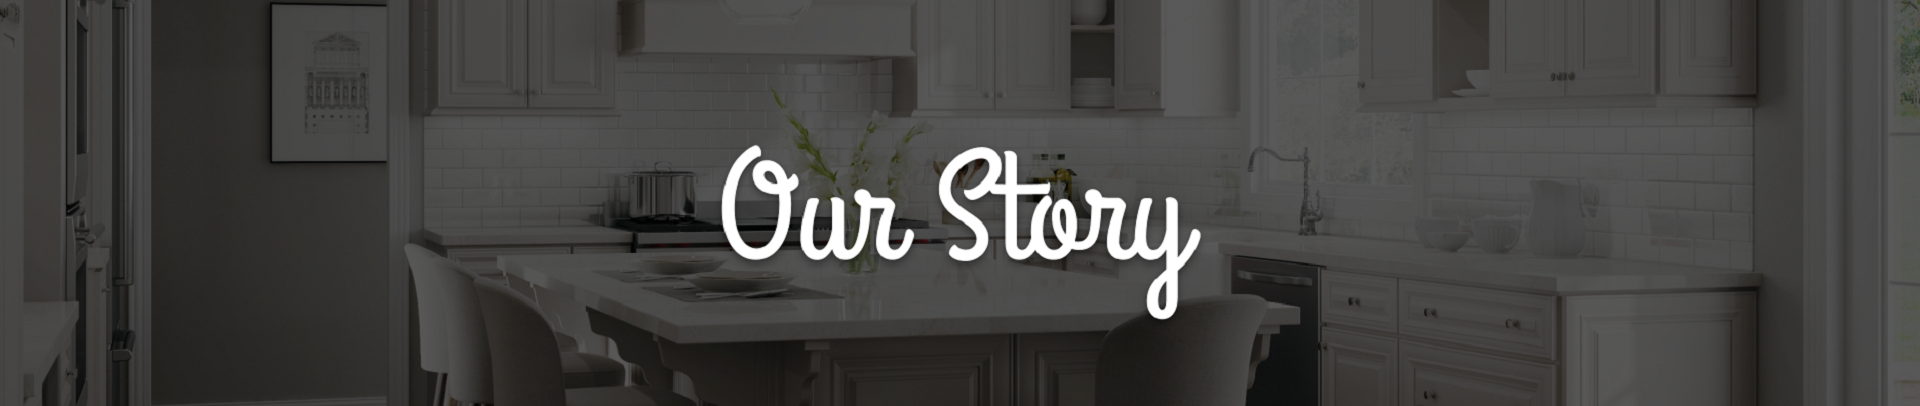 Our Story Banner Cleveland - Town Sell Cabinets